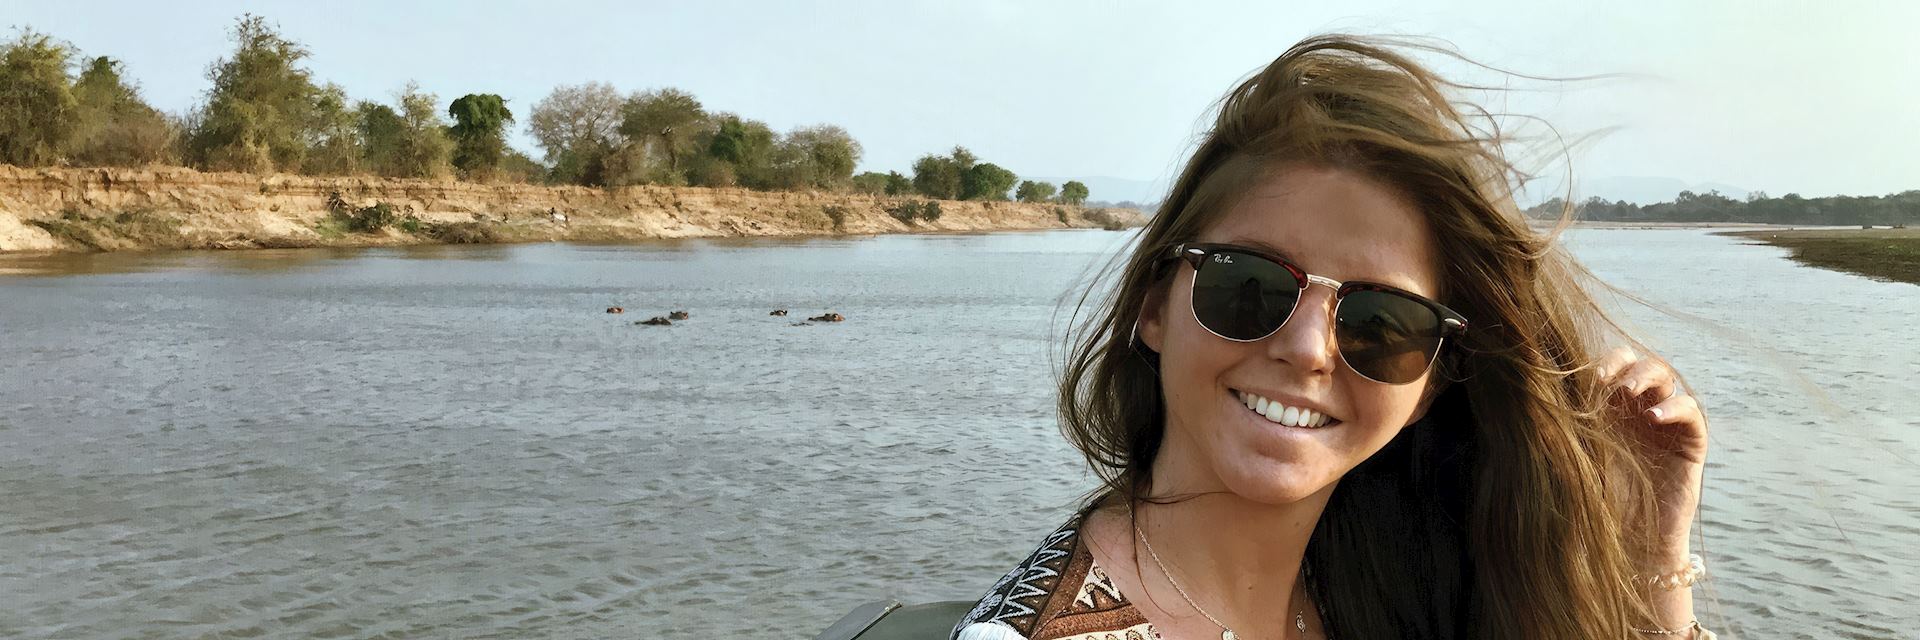 Louise on the Luangwa River, Zambia